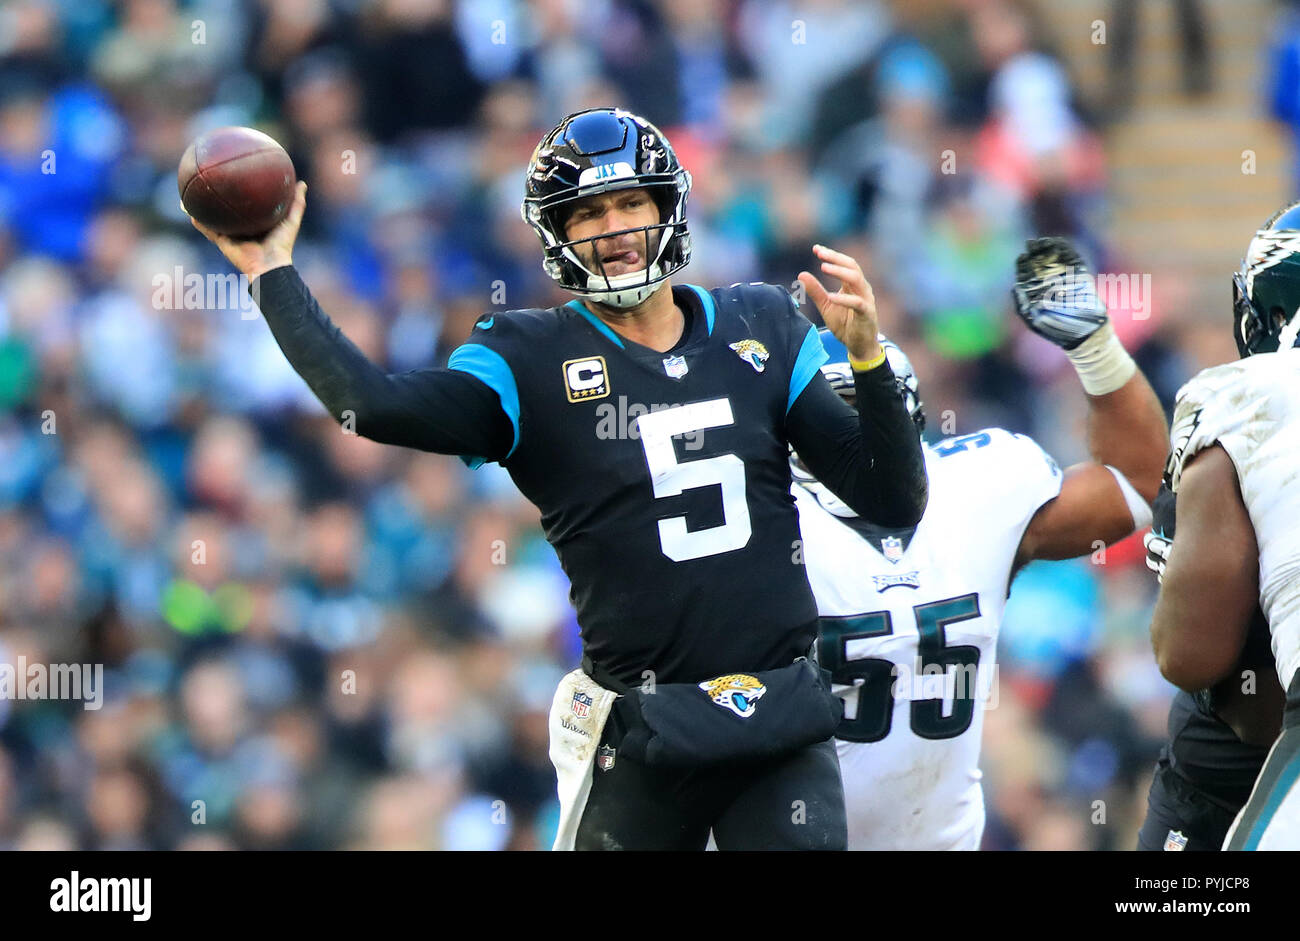 Jacksonville Jaguars' Blake Bortles in action during the International Series NFL match at Wembley Stadium, London. PRESS ASSOCIATION Photo. Picture date: Sunday October 28, 2018. See PA story GRIDIRON London. Photo credit should read: Simon Cooper/PA Wire. RESTRICTIONS: News and Editorial use only. Commercial/Non-Editorial use requires prior written permission from the NFL. Digital use subject to reasonable number restriction and no video simulation of game. Stock Photo